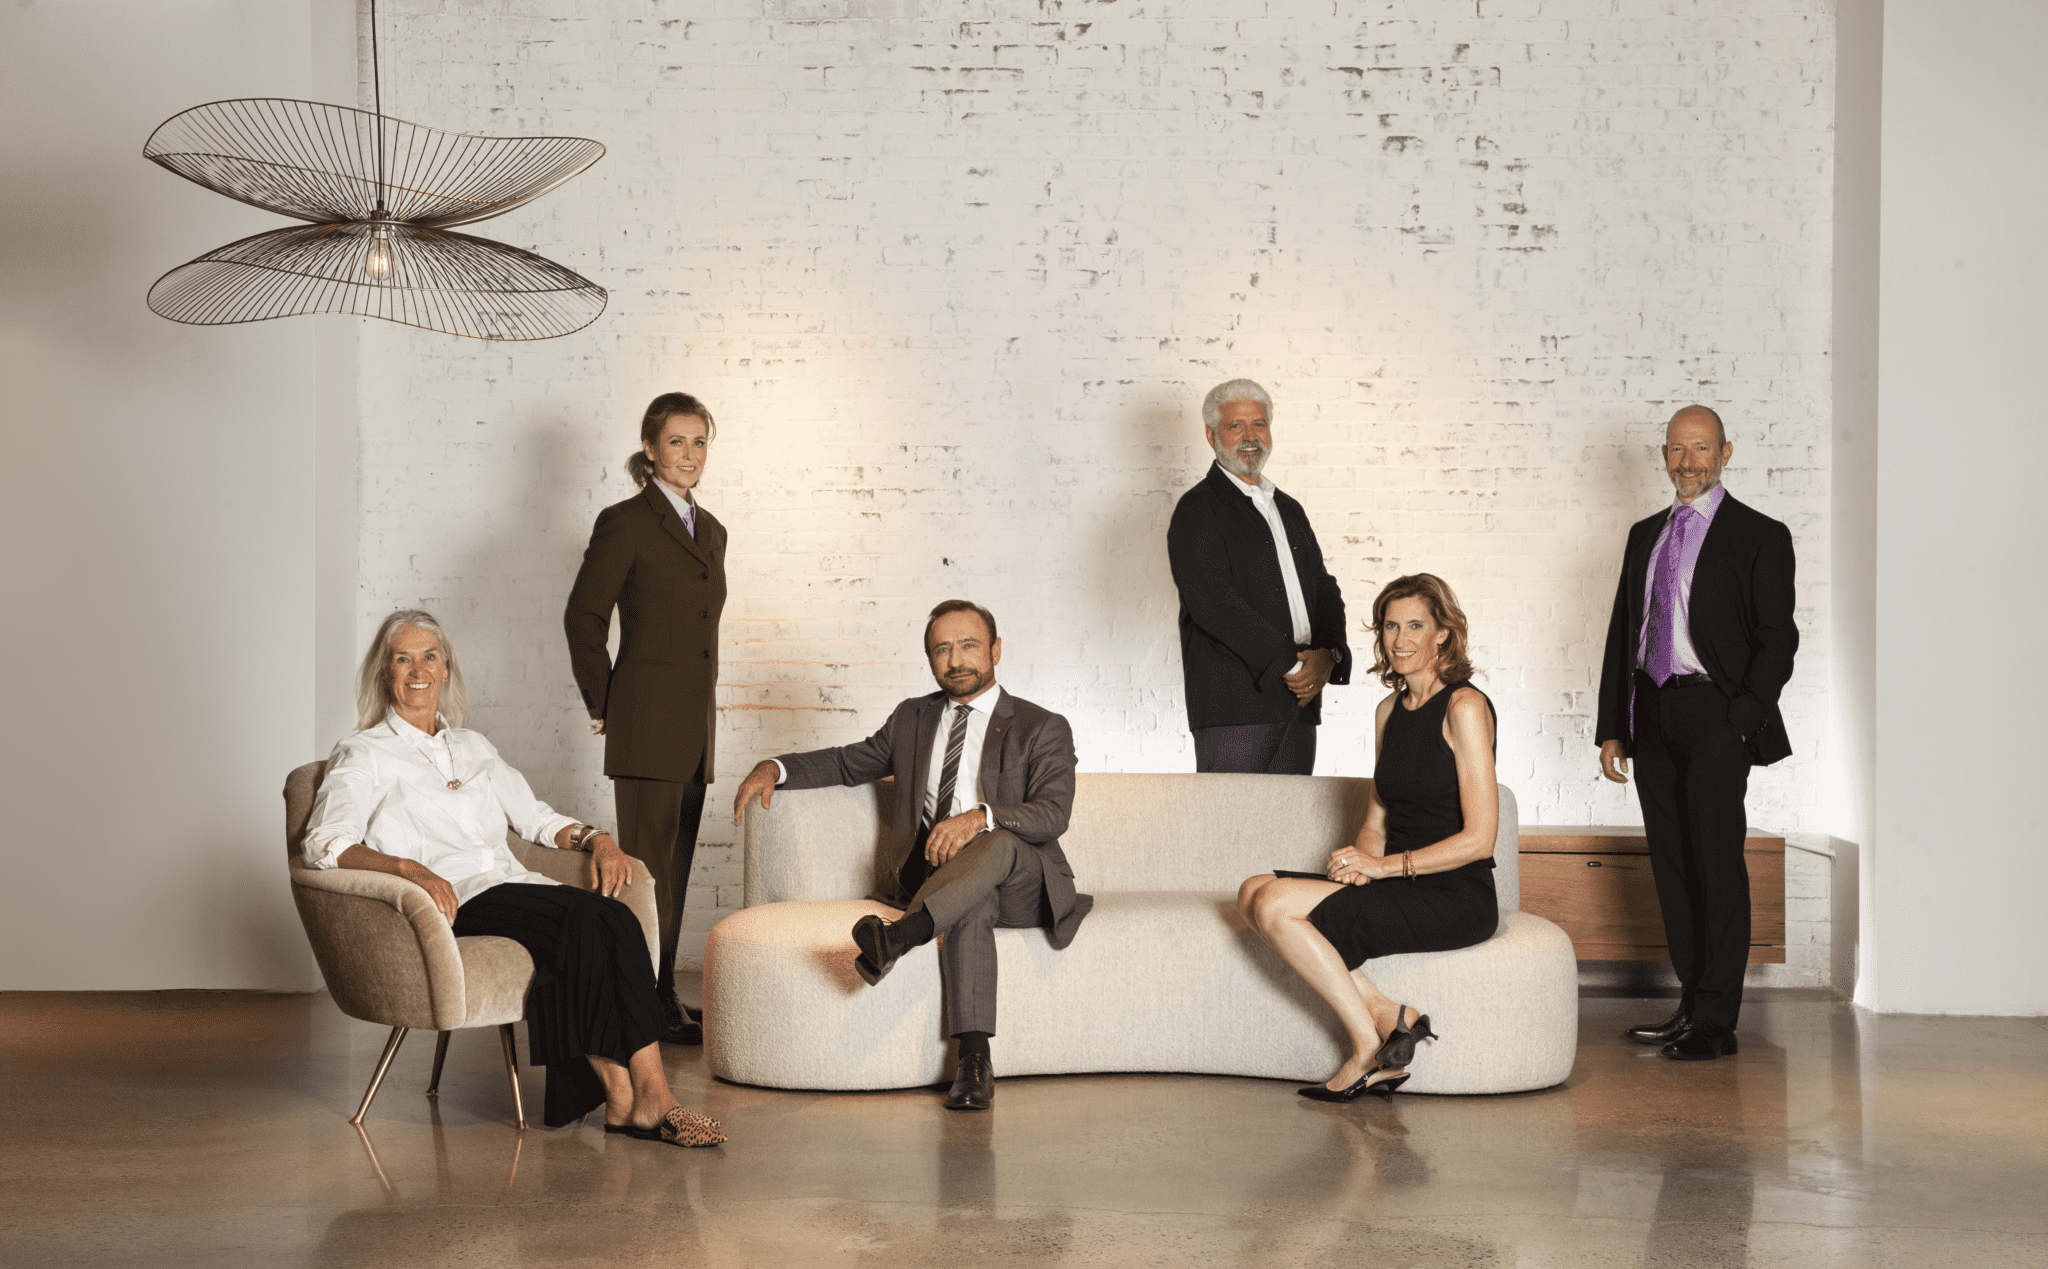 An image showing the six 2021 New England Design Hall of Fame inductees sitting and standing 